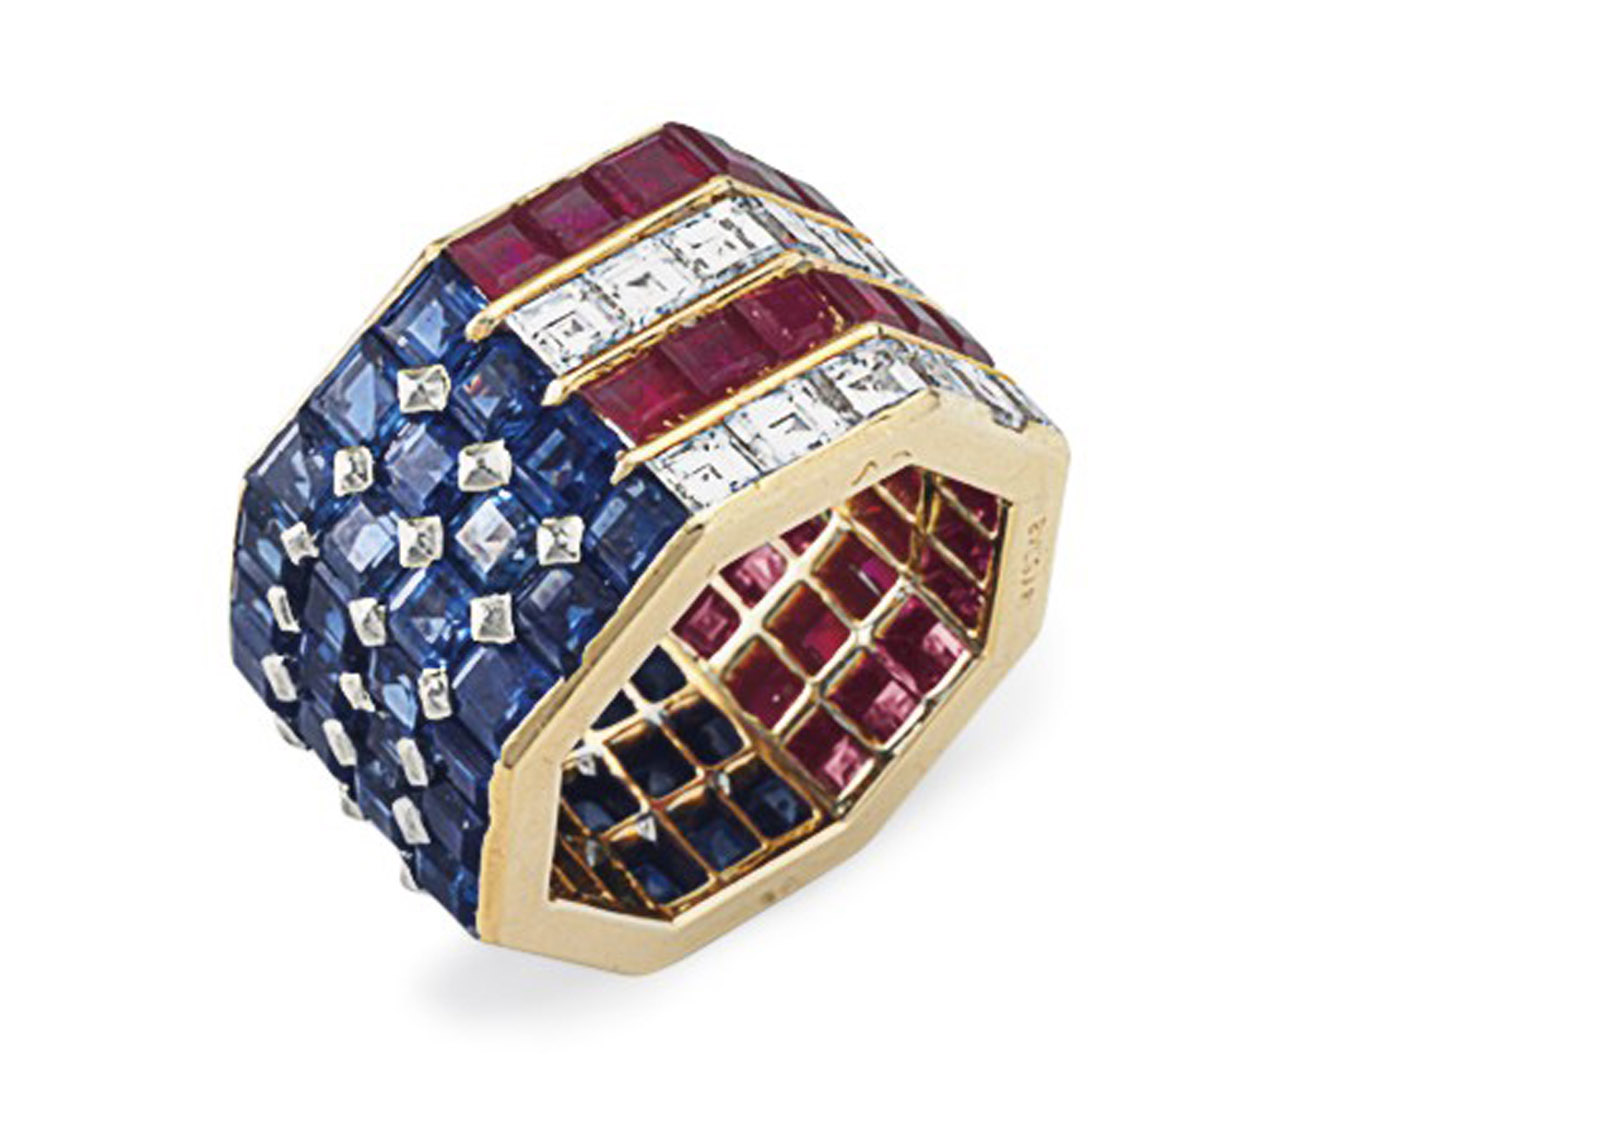 This undated photo provided by Christie's shows a Bulgari diamond, sapphire and ruby ring set in an American flag motif that was once worn by Nancy Reagan. The ring, which will be sold by Christie's New York during a two-day auction of the contents of Ronald and Nancy Reagan's ranch-style home in California, has a pre-sale estimate of $5,000-$8,000. Christieâ€™s announced Thursday, June 30, 2016, highlights of the Sept. 21-22 sale in New York City. (Christie's via AP) MANDATORY CREDIT